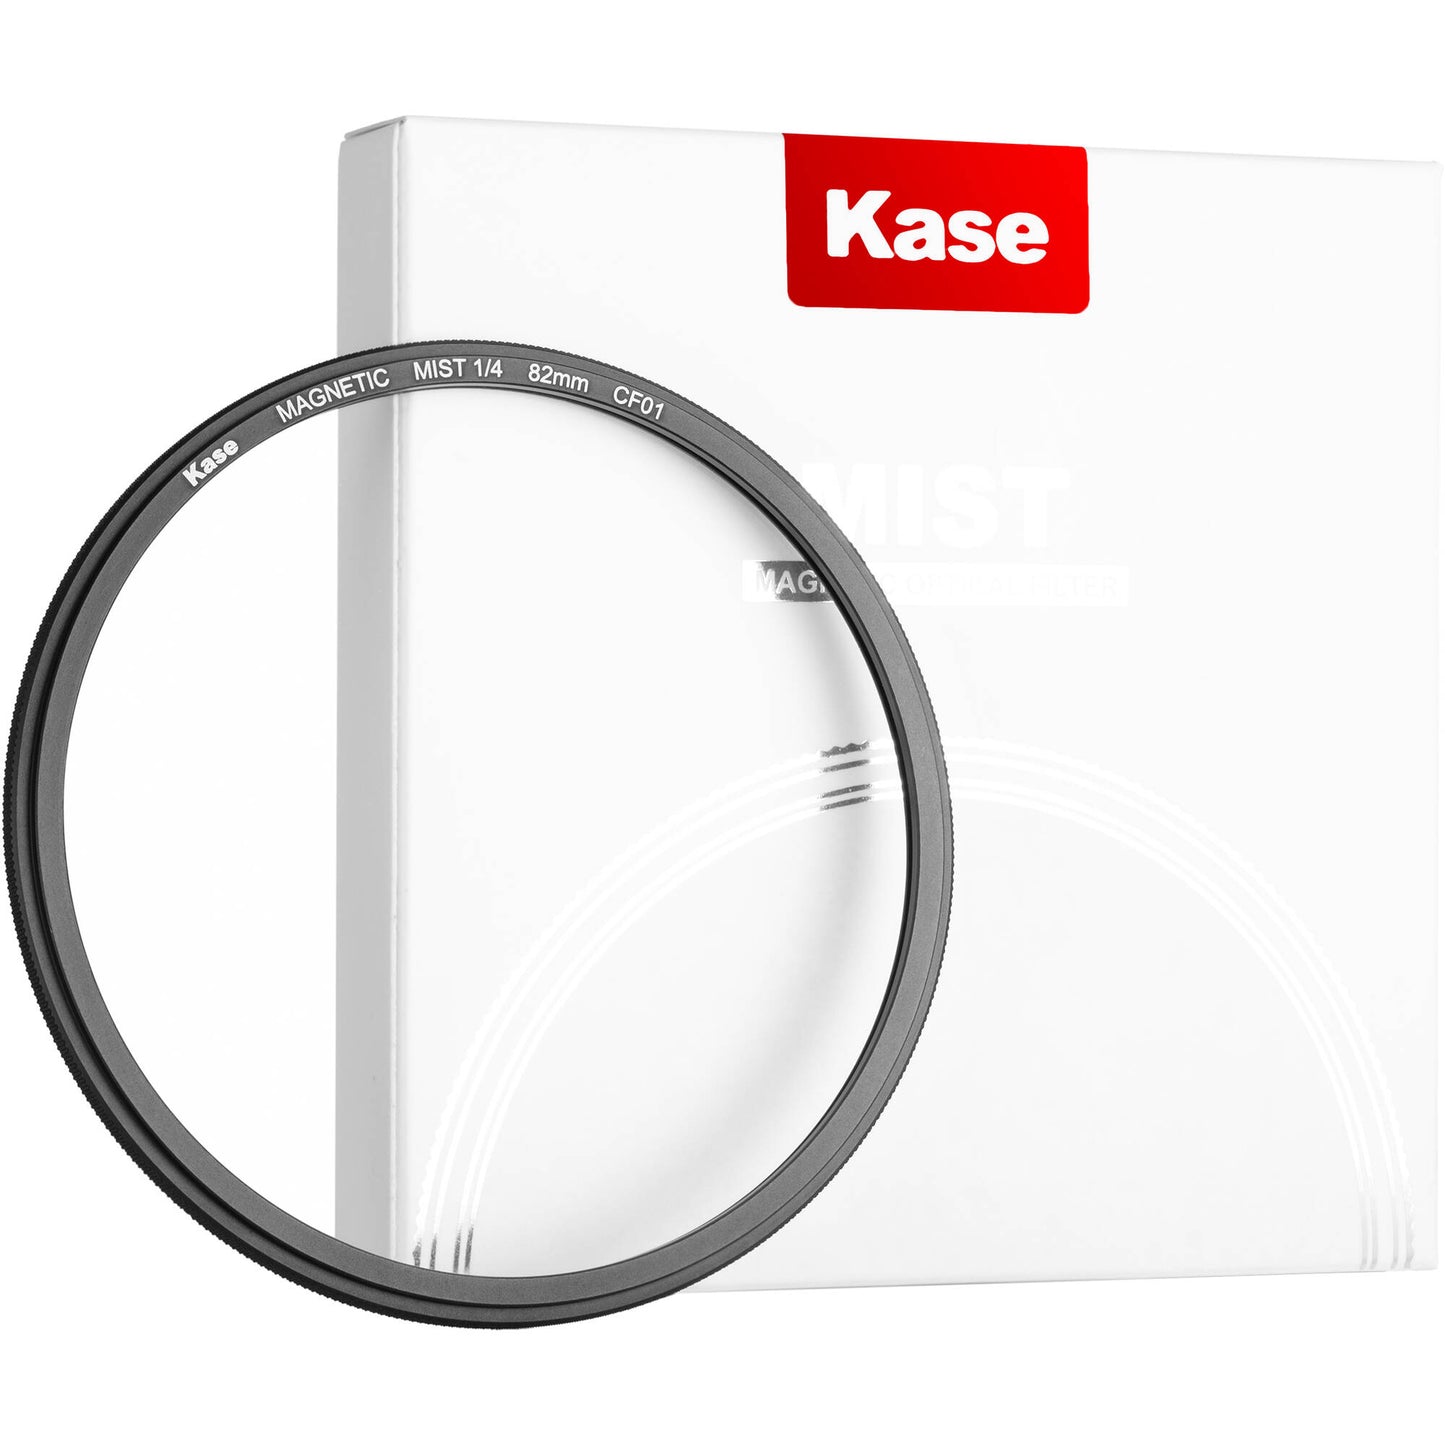 Kase 82MM Magnetic White Mist Filter 1/4 with Magnetic Adapter